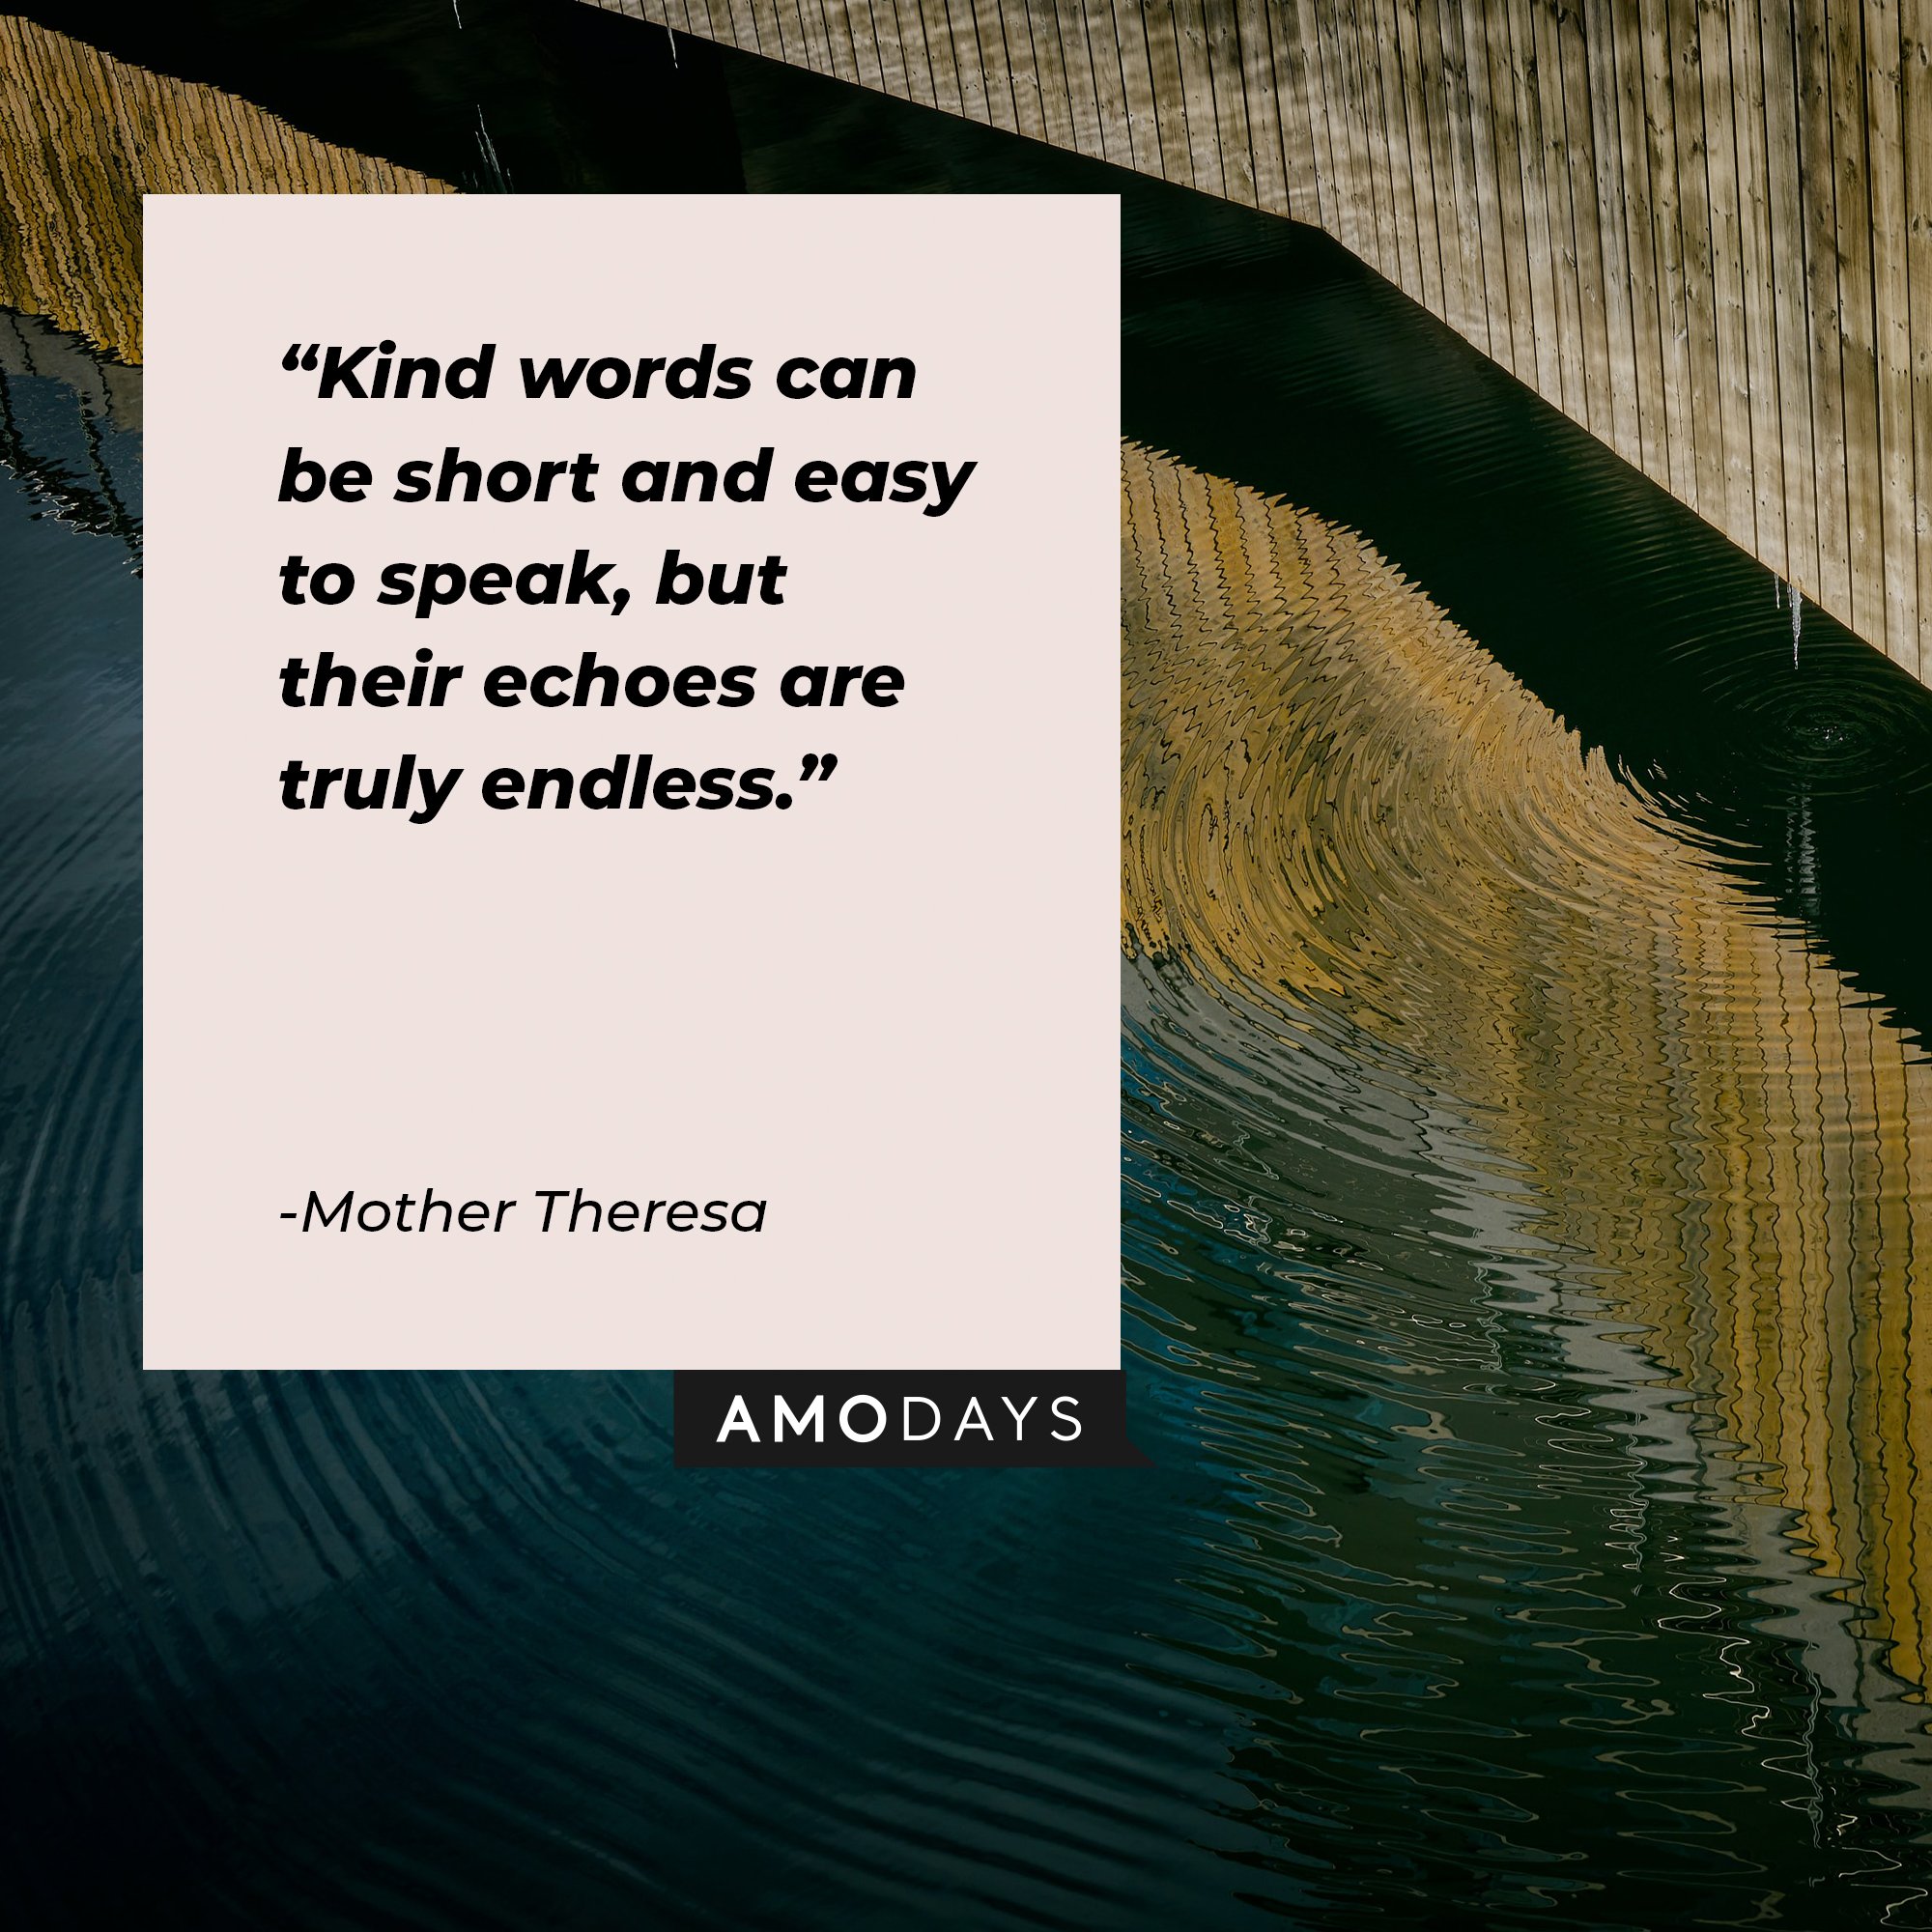 Mother Theresa 's quote: “Kind words can be short and easy to speak, but their echoes are truly endless.” | Image: AmoDays